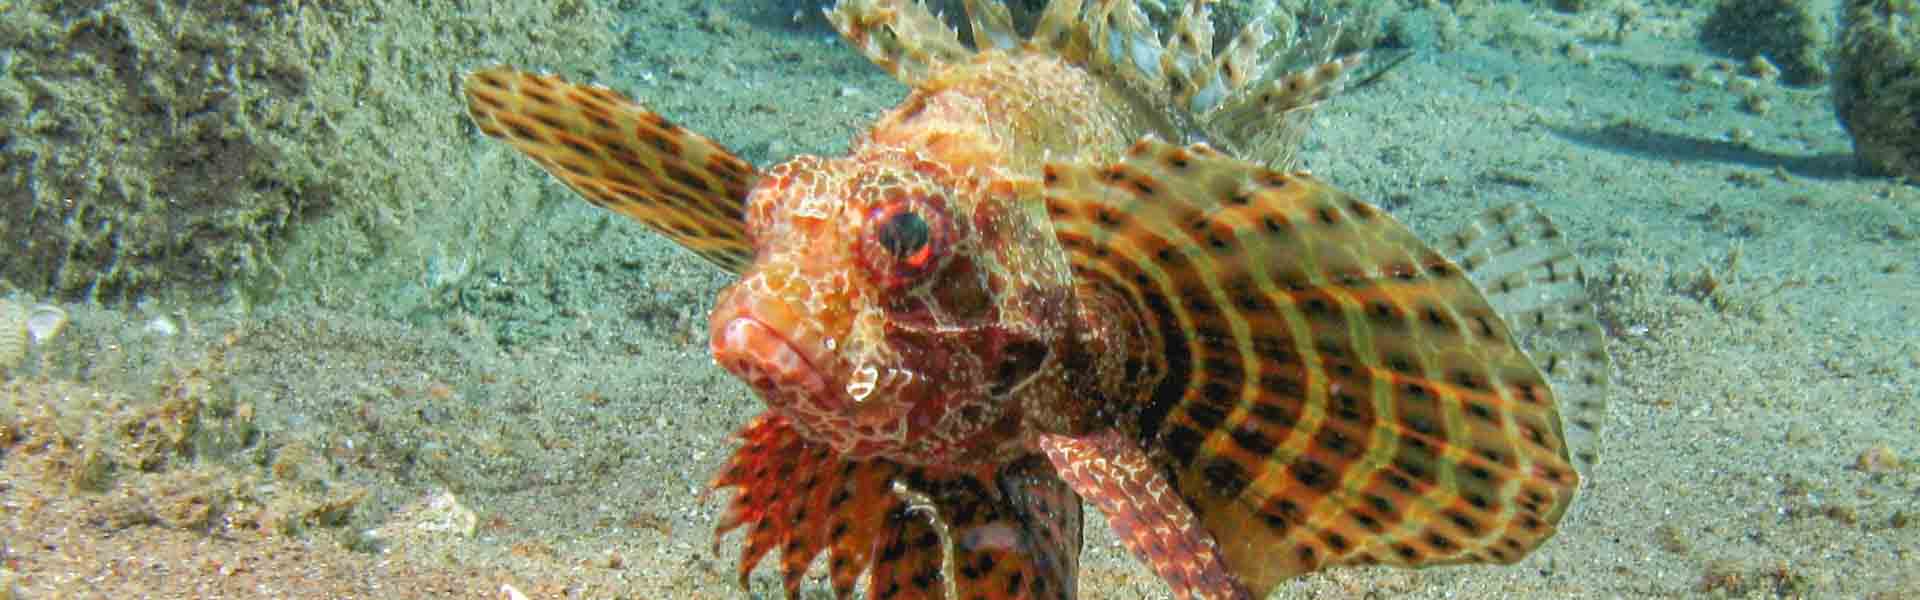 The Red Sea Dwarf Lionfish